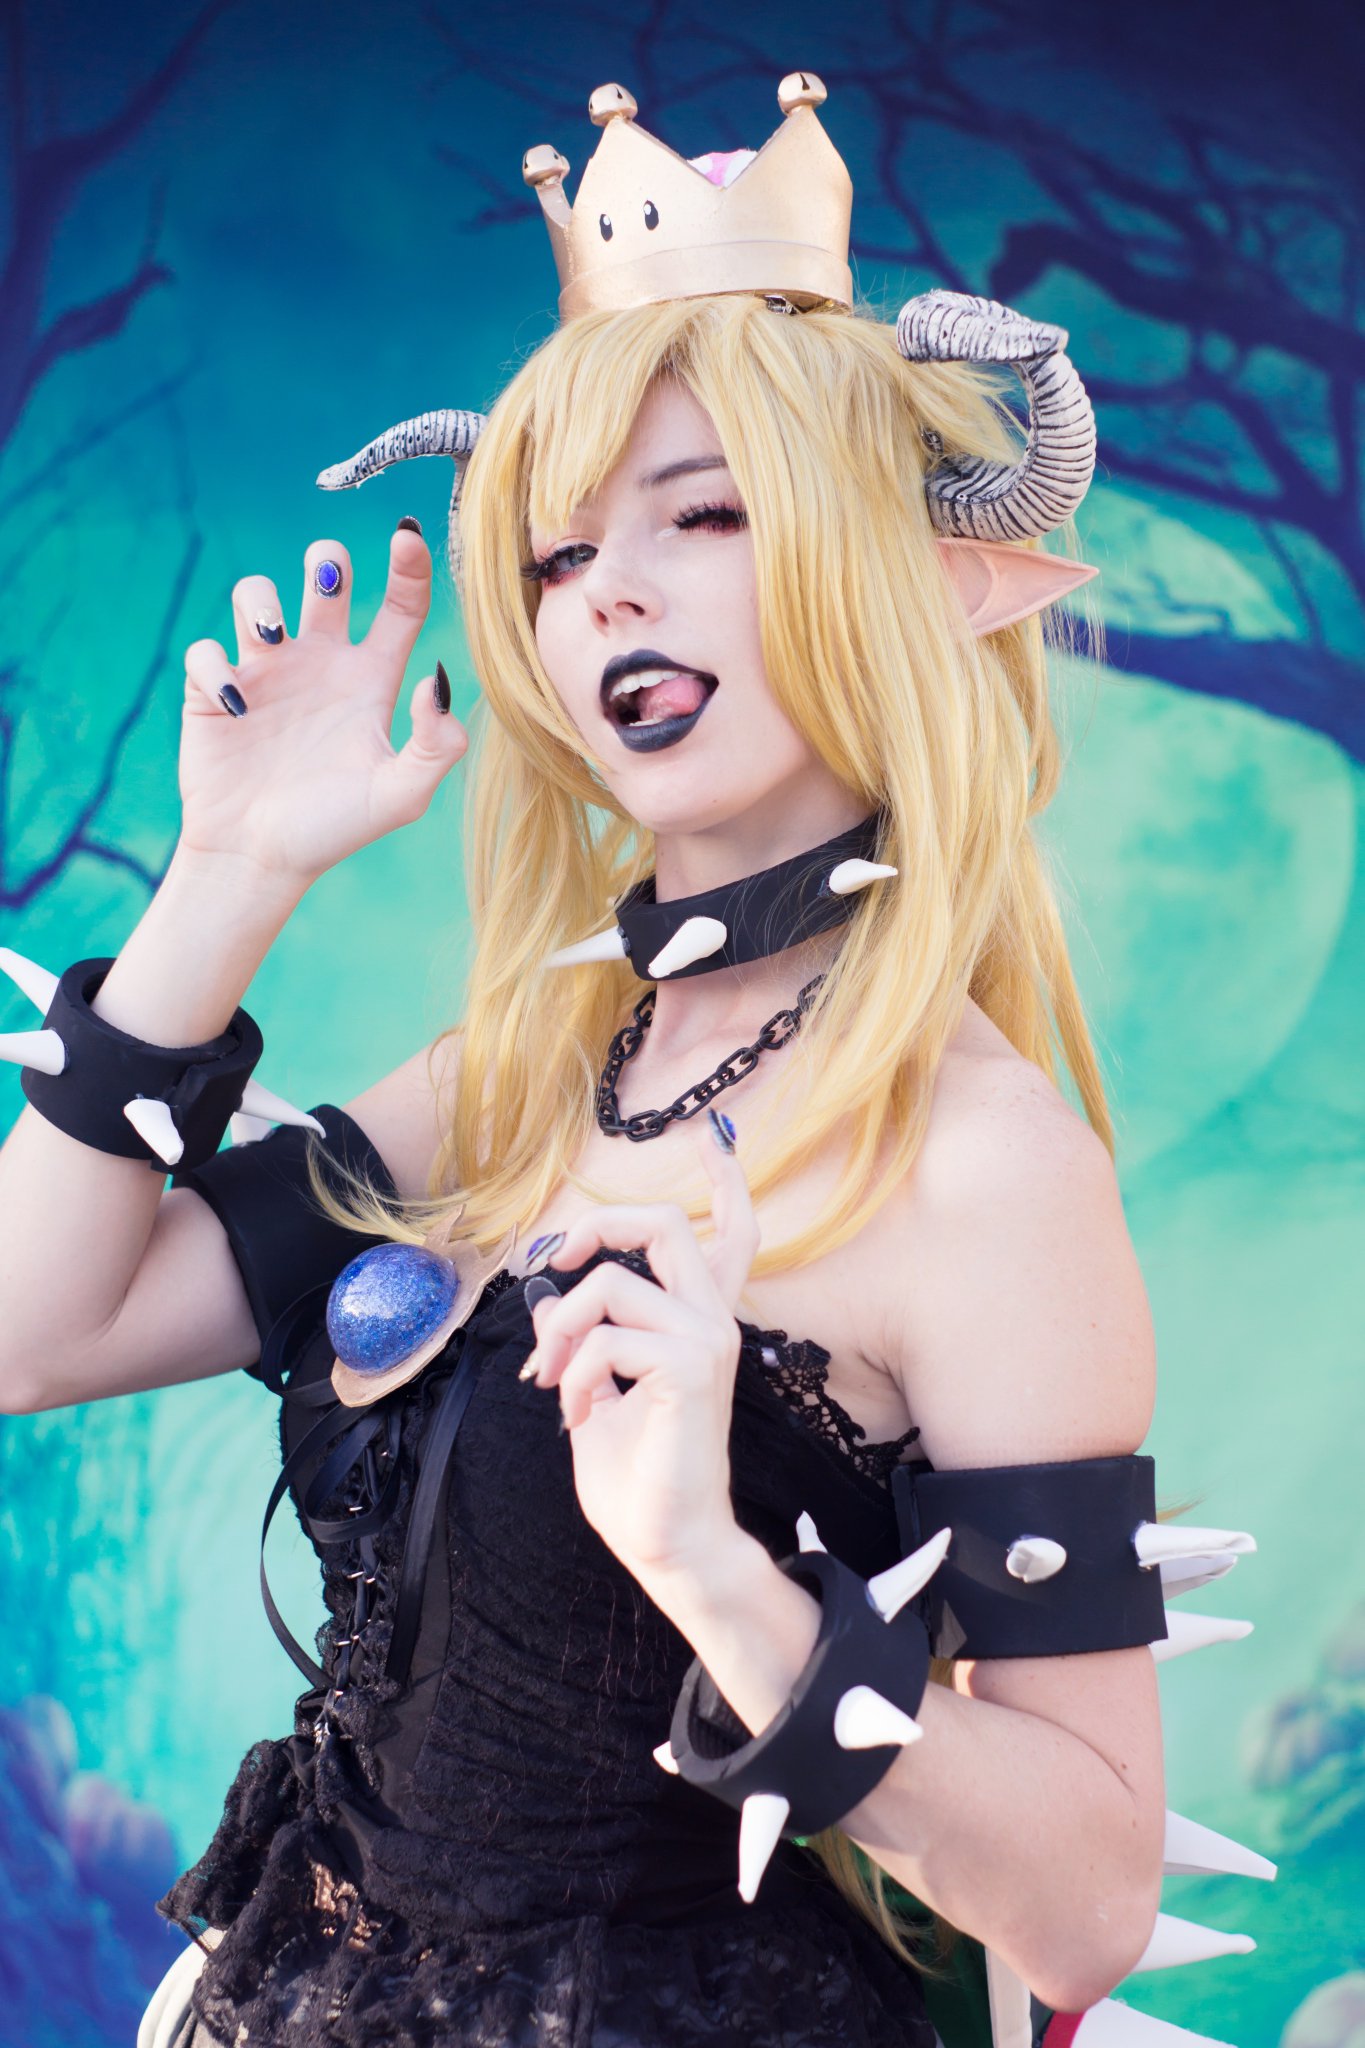 \u30ef\u30a4\u30d5\u30b3\u30b9\u30d7\u30ec on Twitter: \u0026quot;Bowsette Cosplay\u0026#39;s by @bbypandaface ...